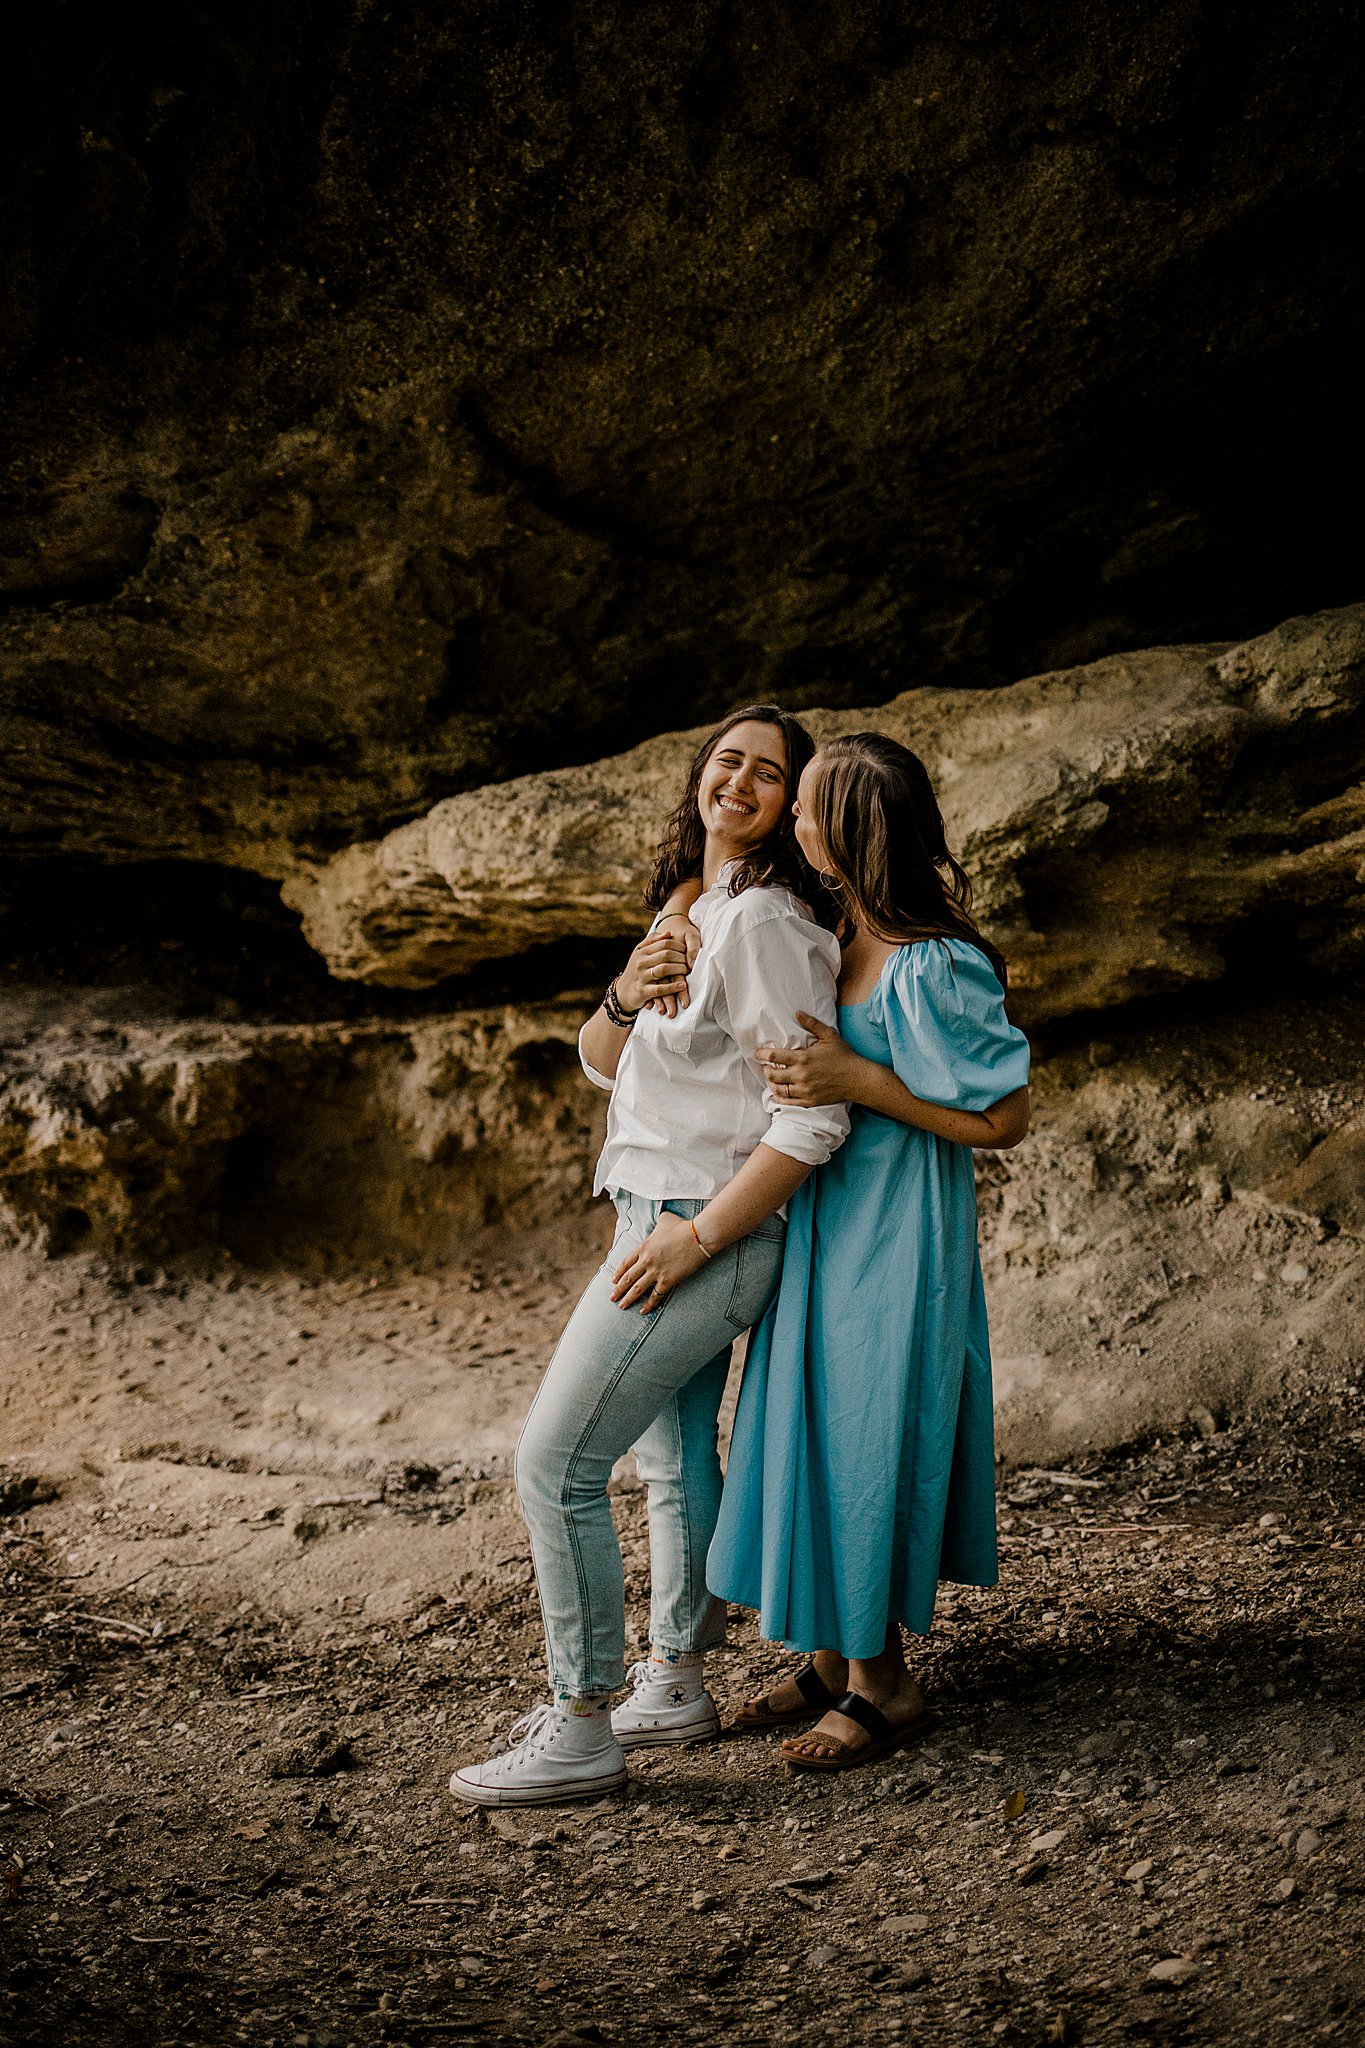 Samantha Mitchell, an LGBTQ Engagement photographer captures two women at Prophet's Rock in Indiana. The two women are snuggling together amongst large rocks. They are kissing.